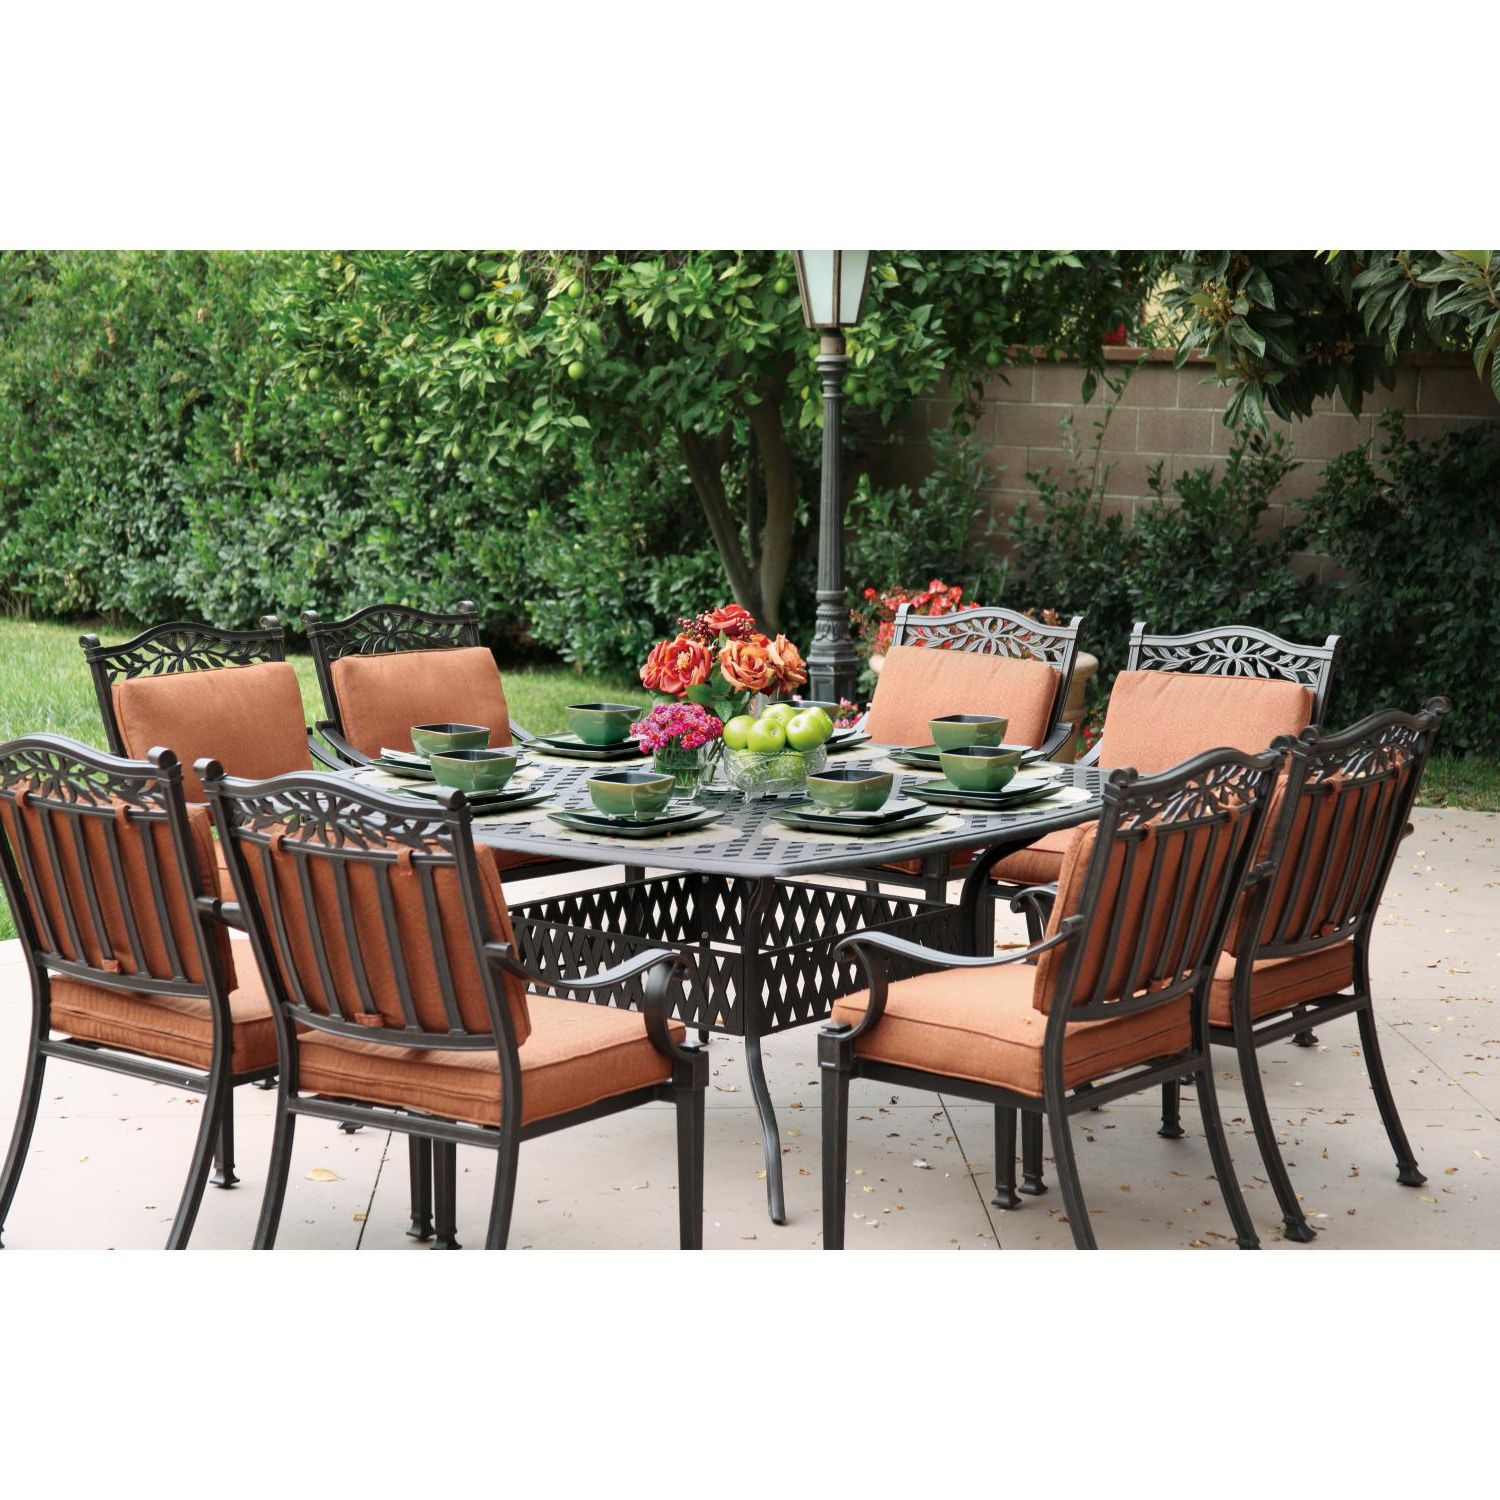 Widely Used 9 Piece Rectangular Patio Dining Sets In Darlee Charleston 9 Piece Cast Aluminum Patio Dining Set (View 15 of 15)